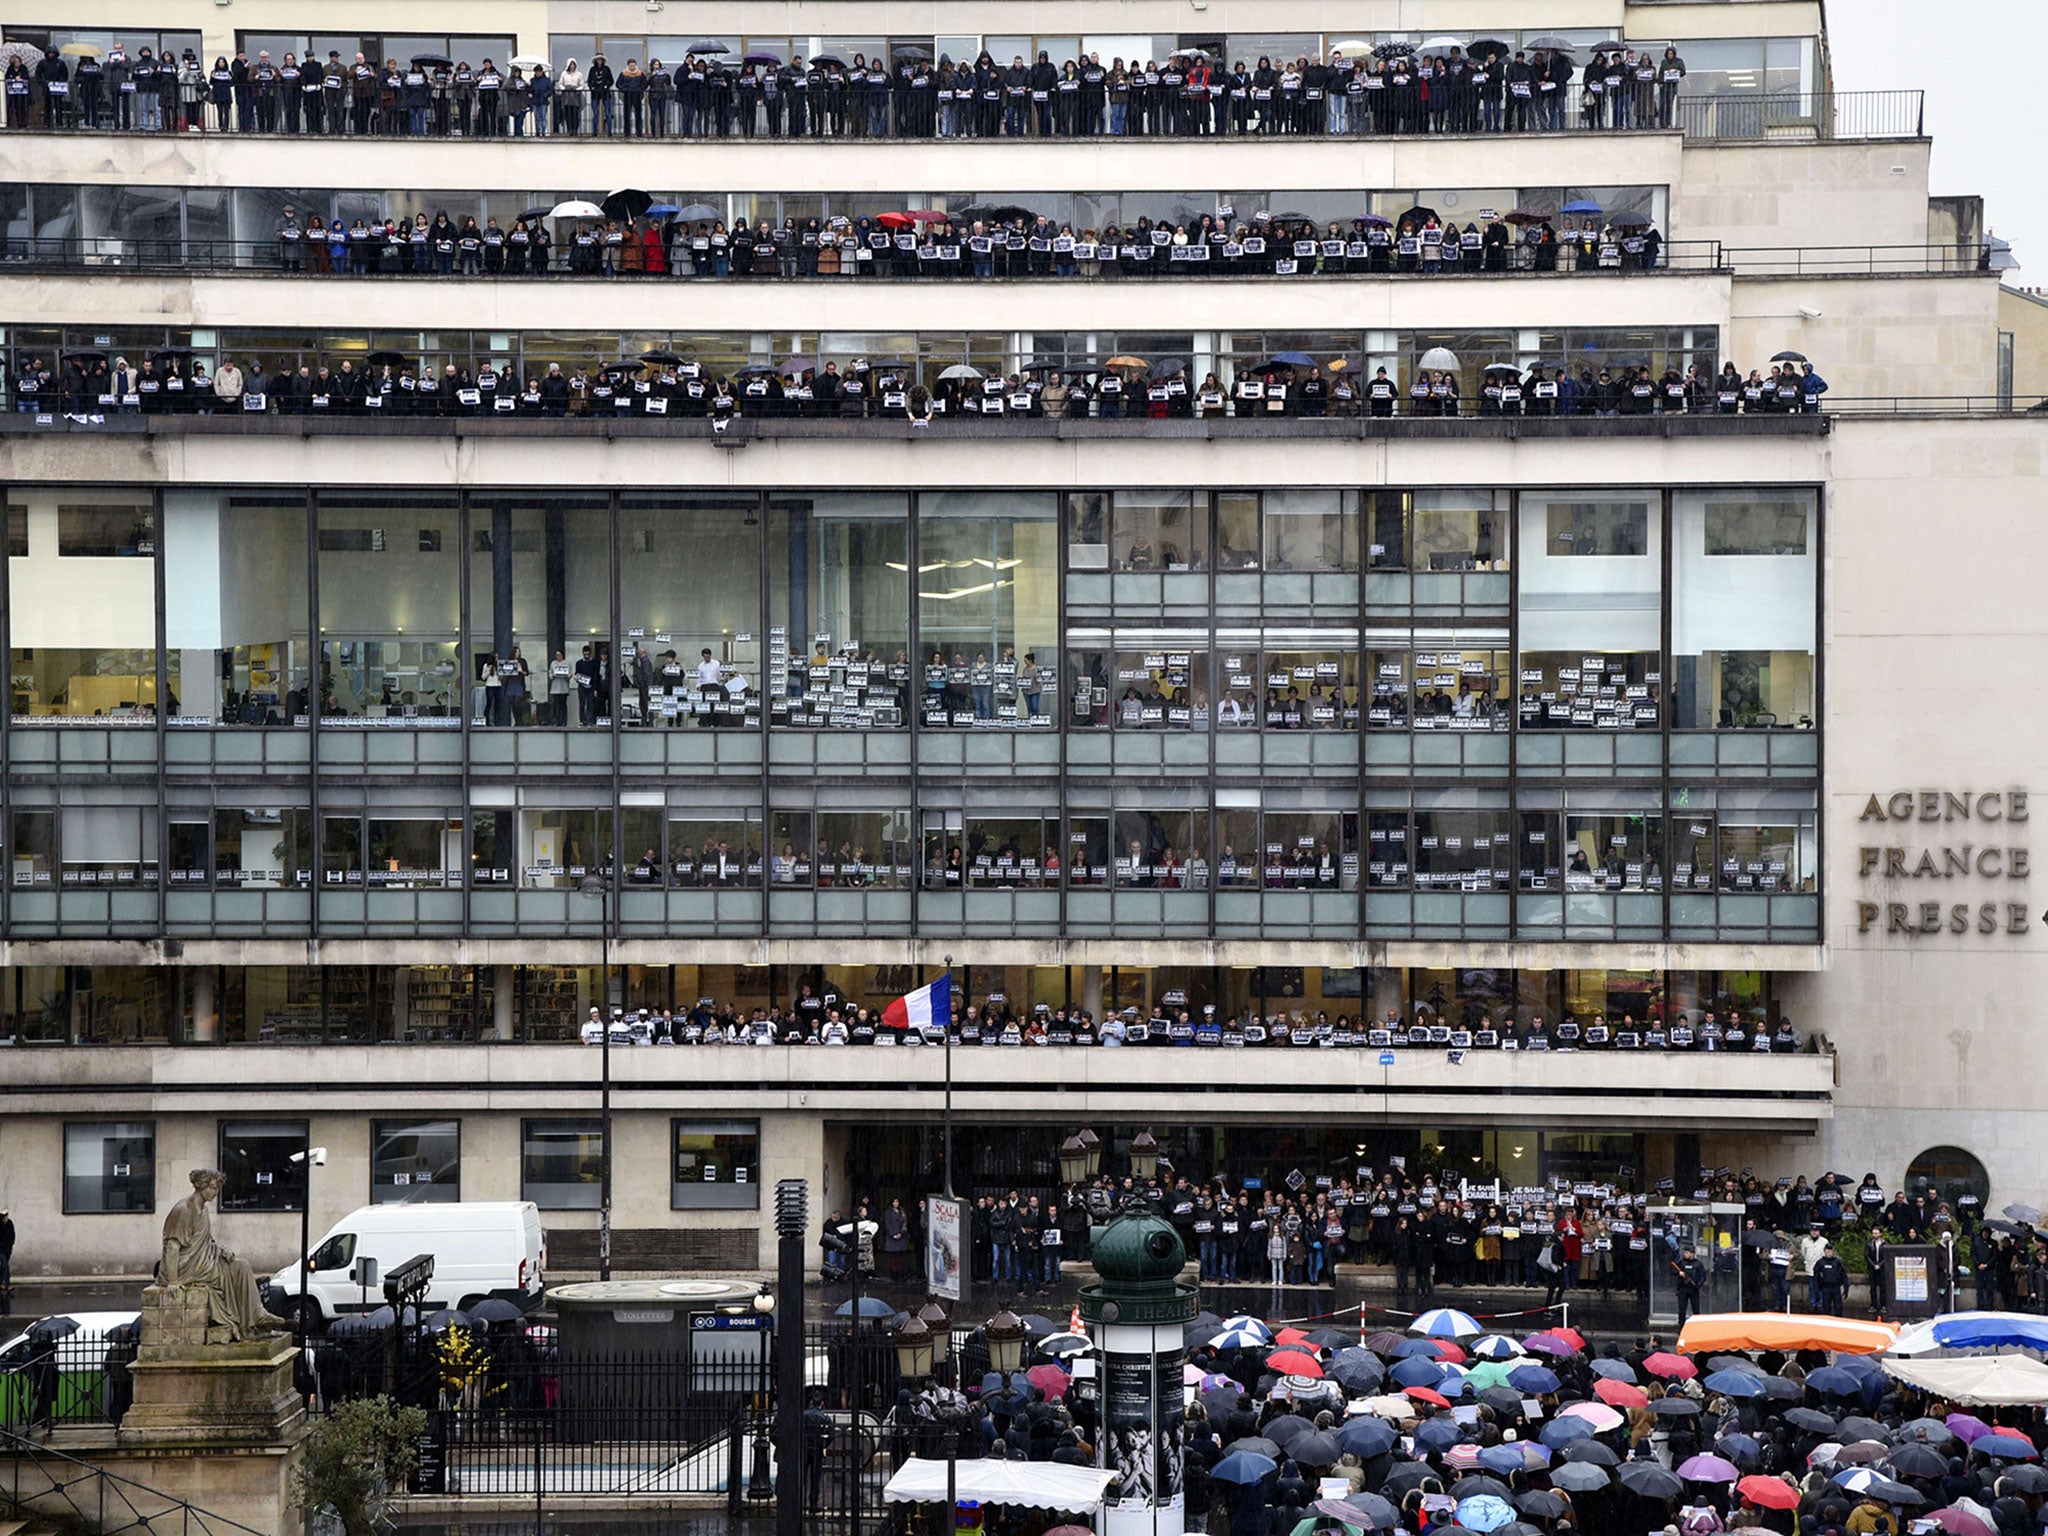 Journalists of international press agency Agence France-Presse (AFP) hold signs reading "Je suis Charlie" (I am Charlie) at their headquarters in Paris as they observe a minute of silence for the victims of an attack by armed gunmen on the offices of Fren